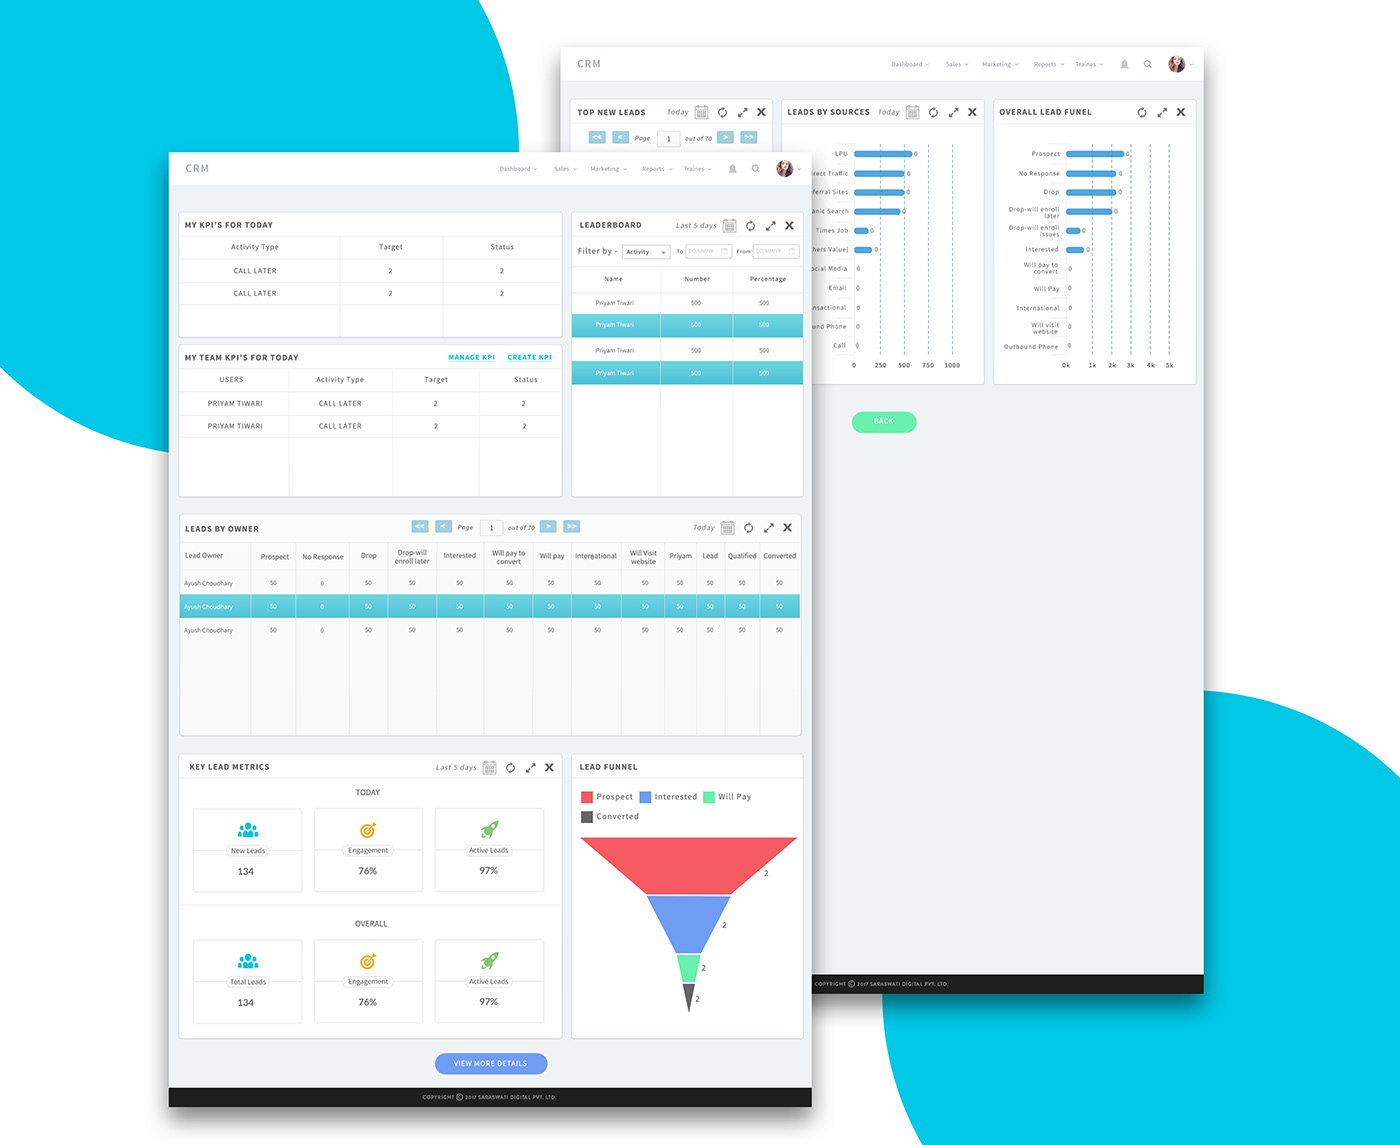 CRM product sales lead conversion dashboard